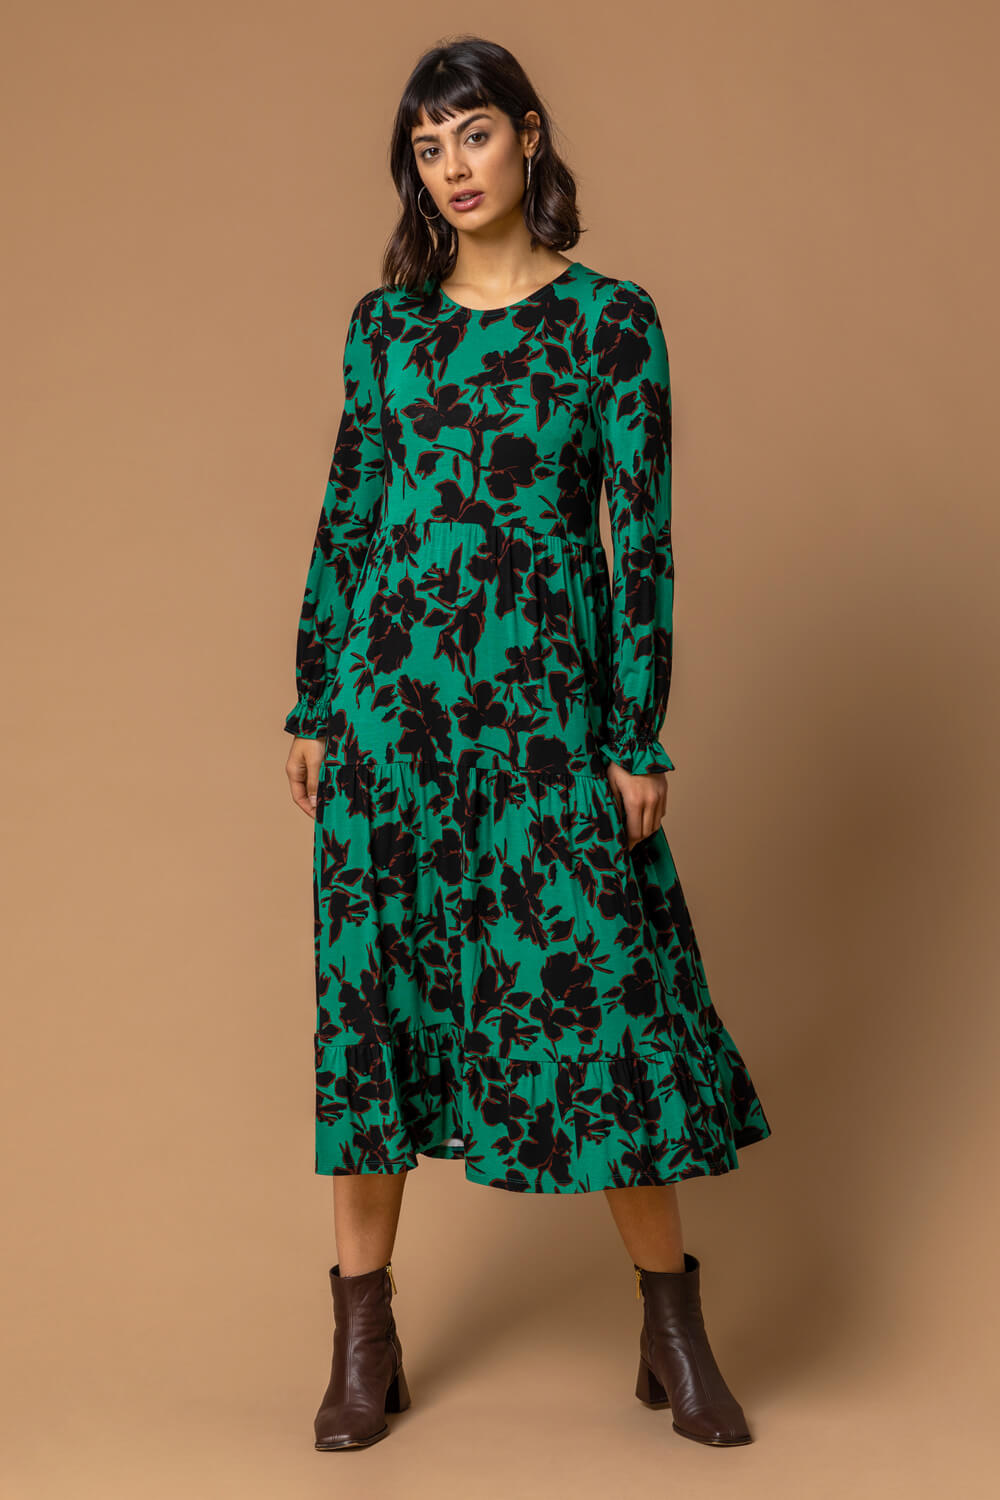 Green Floral Print Tiered Maxi Dress, Image 4 of 5